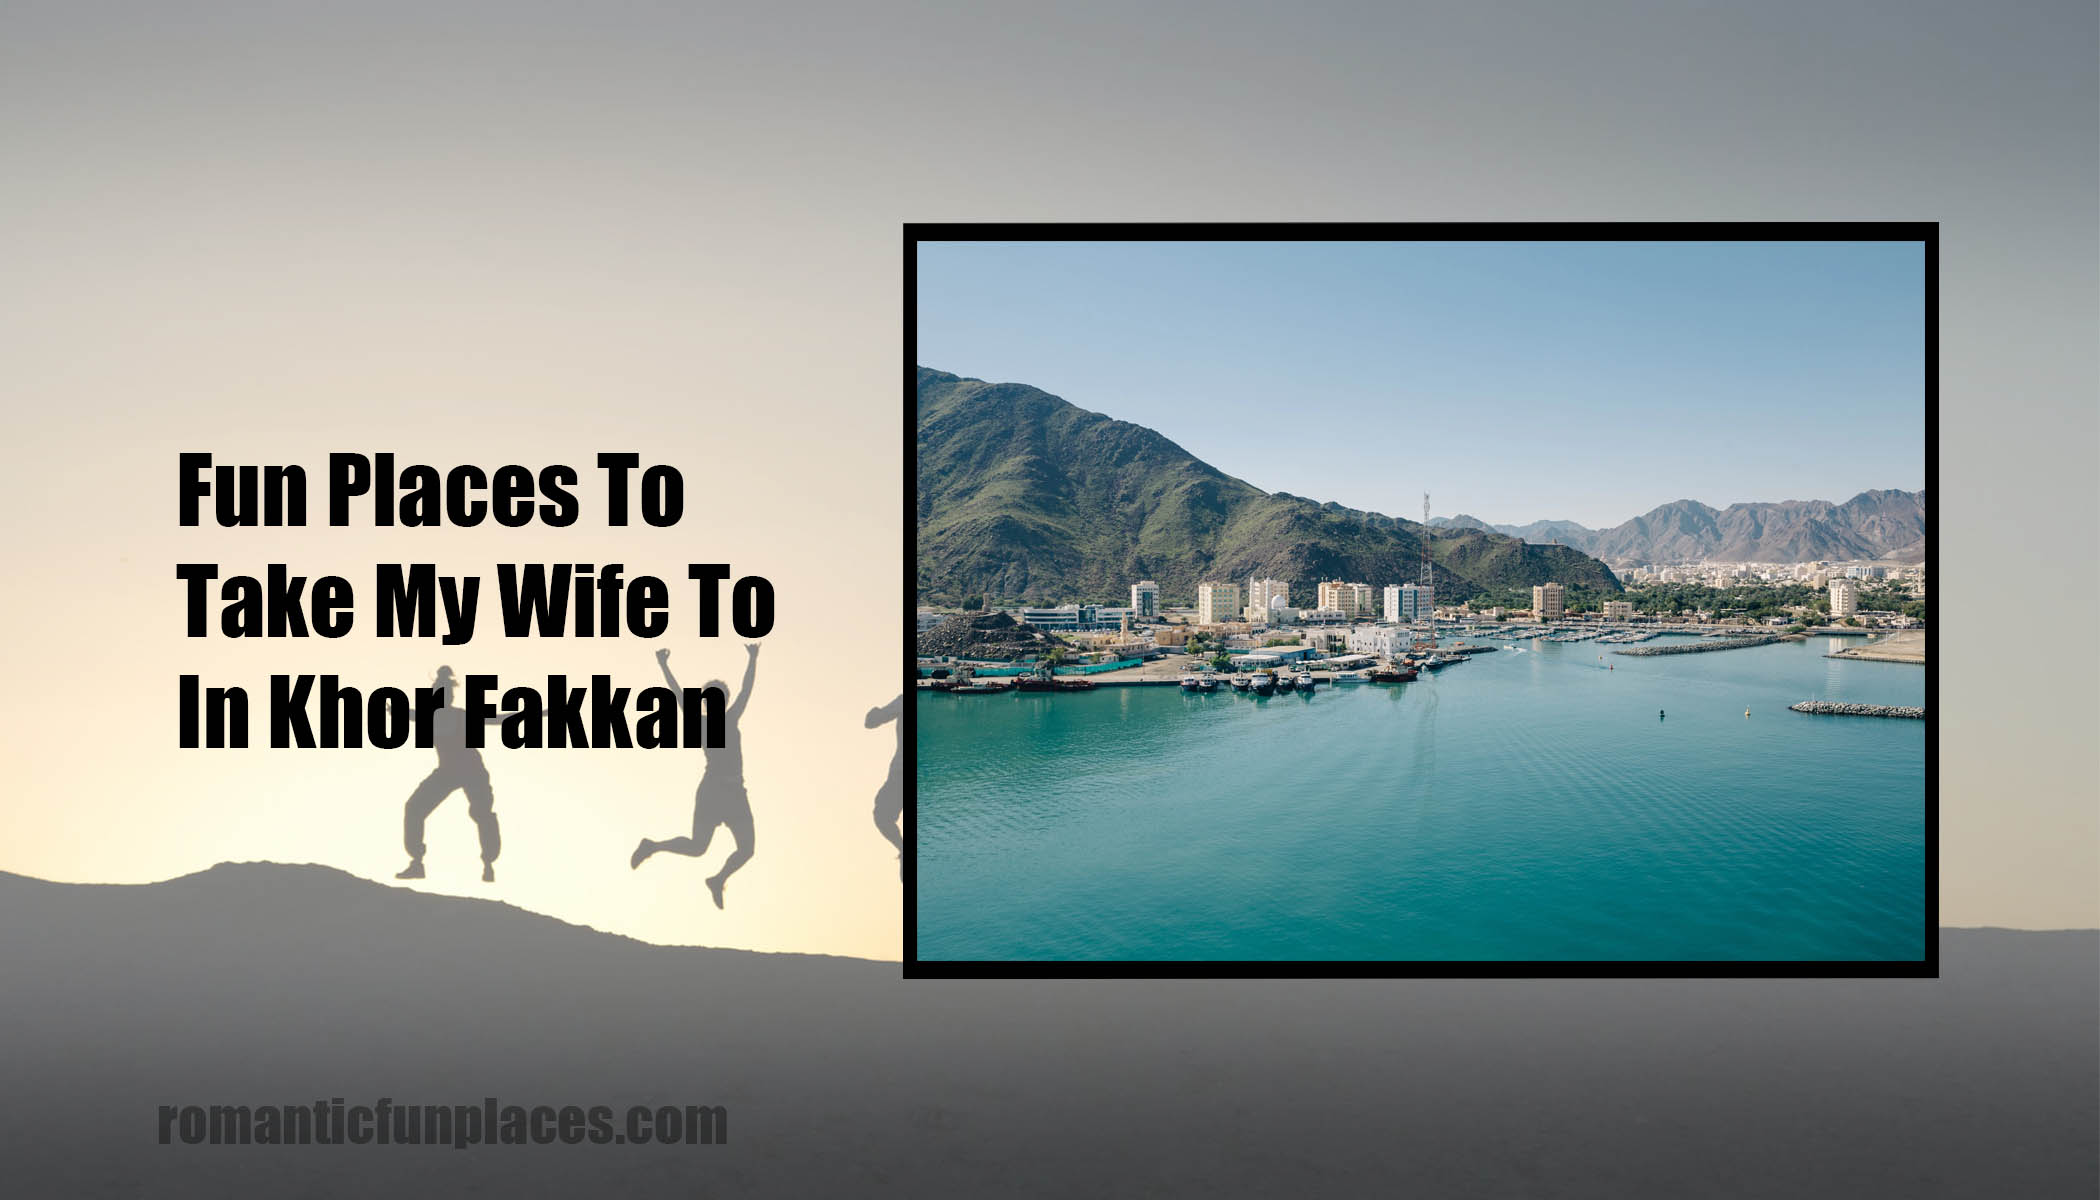 Fun Places To Take My Wife To In Khor Fakkan